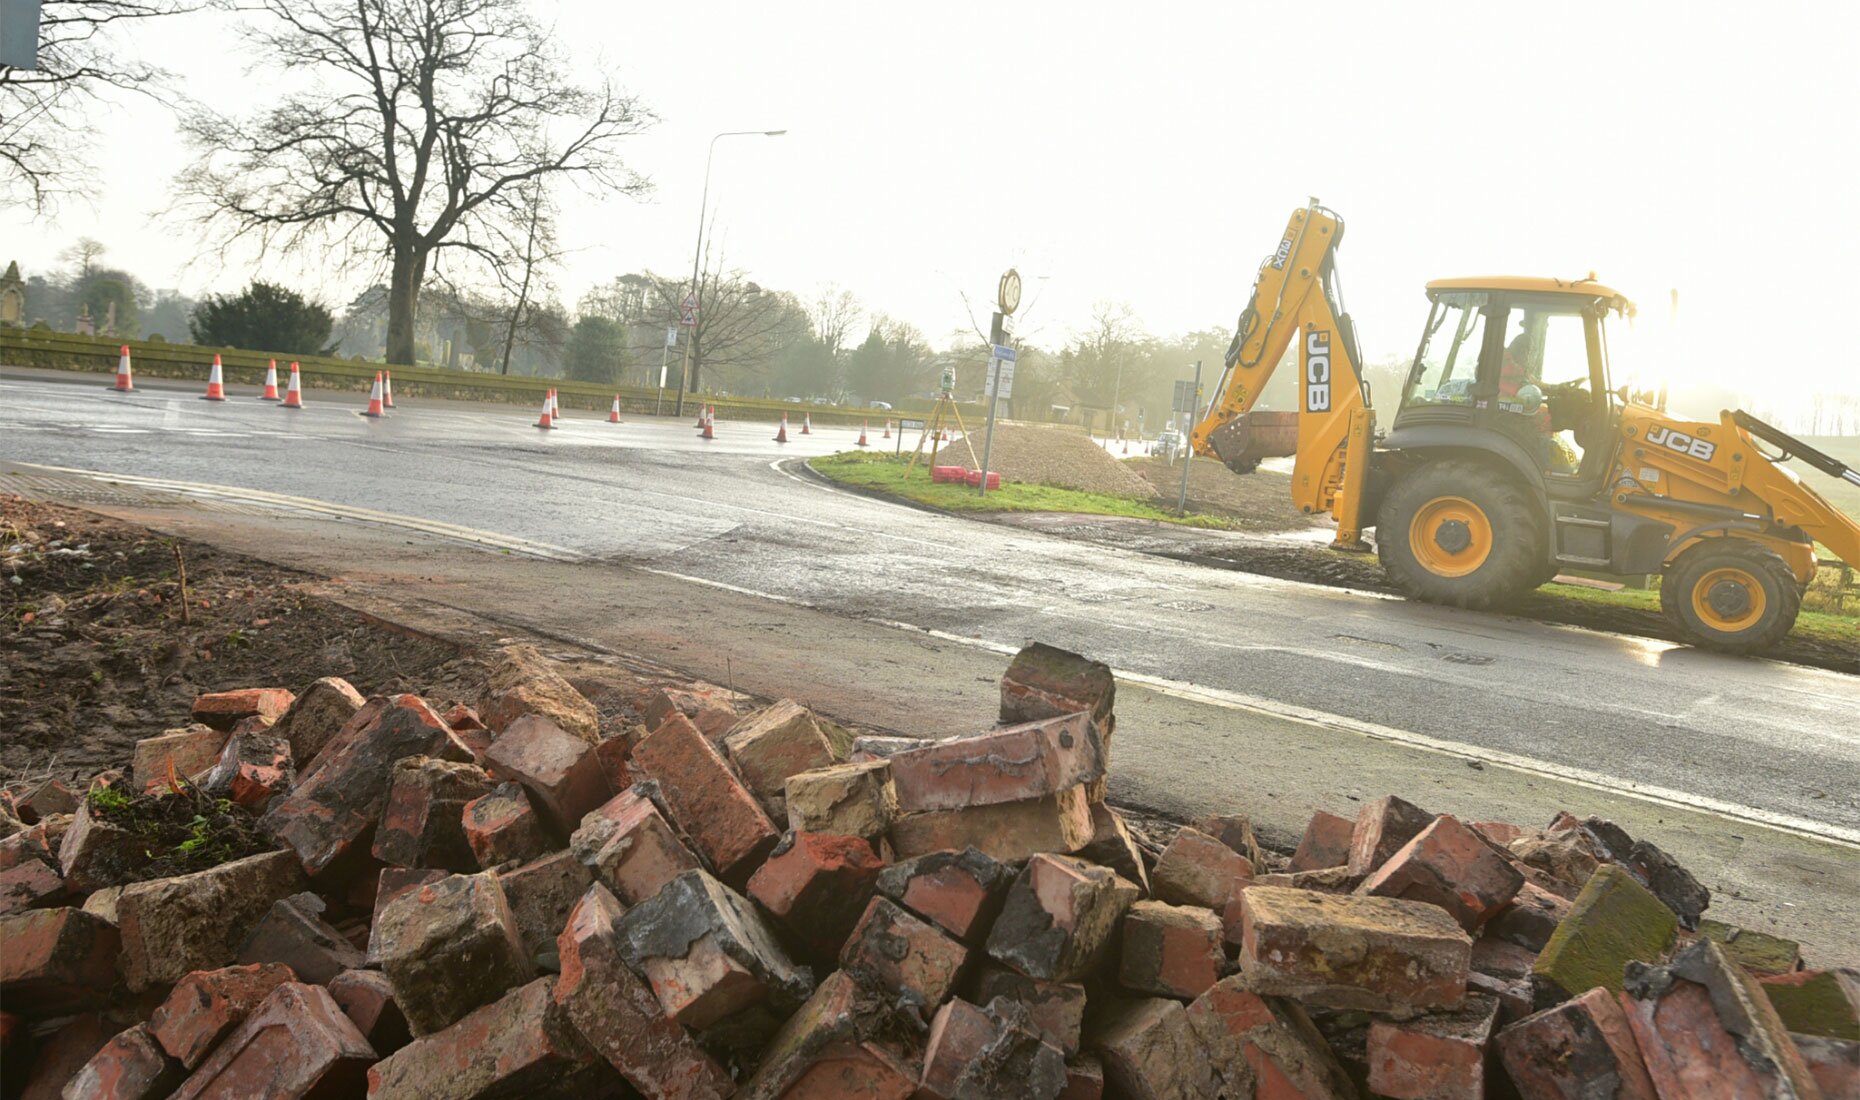 The roadworks to improve access to Canwick Road in Lincoln. Photo: Steve Smailes for The Lincolnite